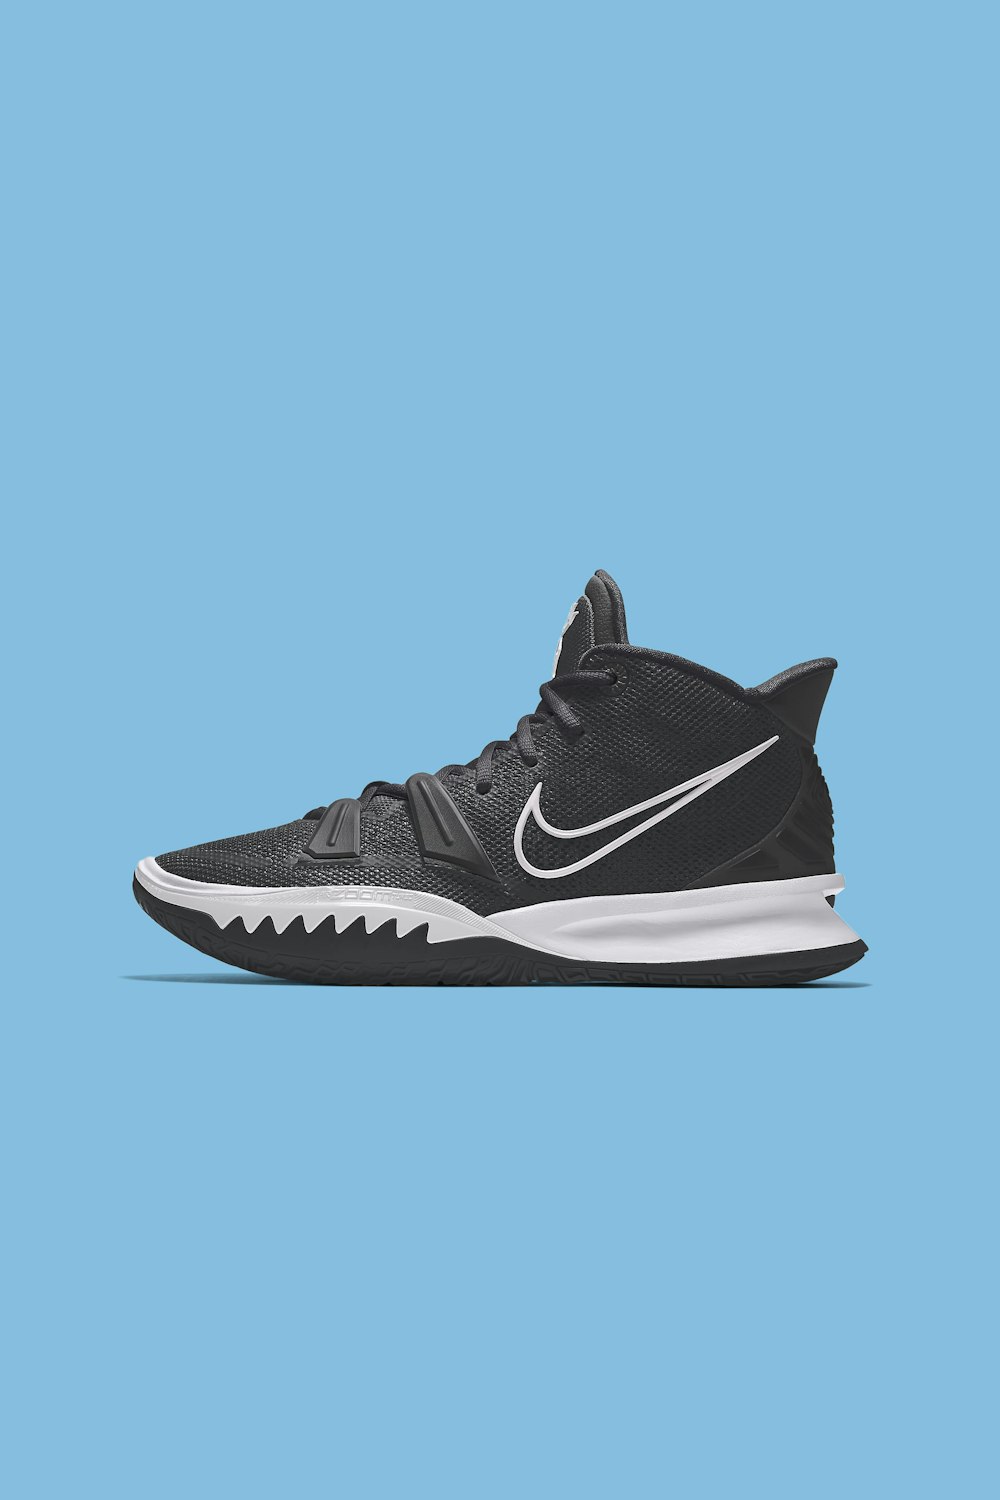 20+ Nike Shoes Pictures Download Images & Stock Photos on Unsplash